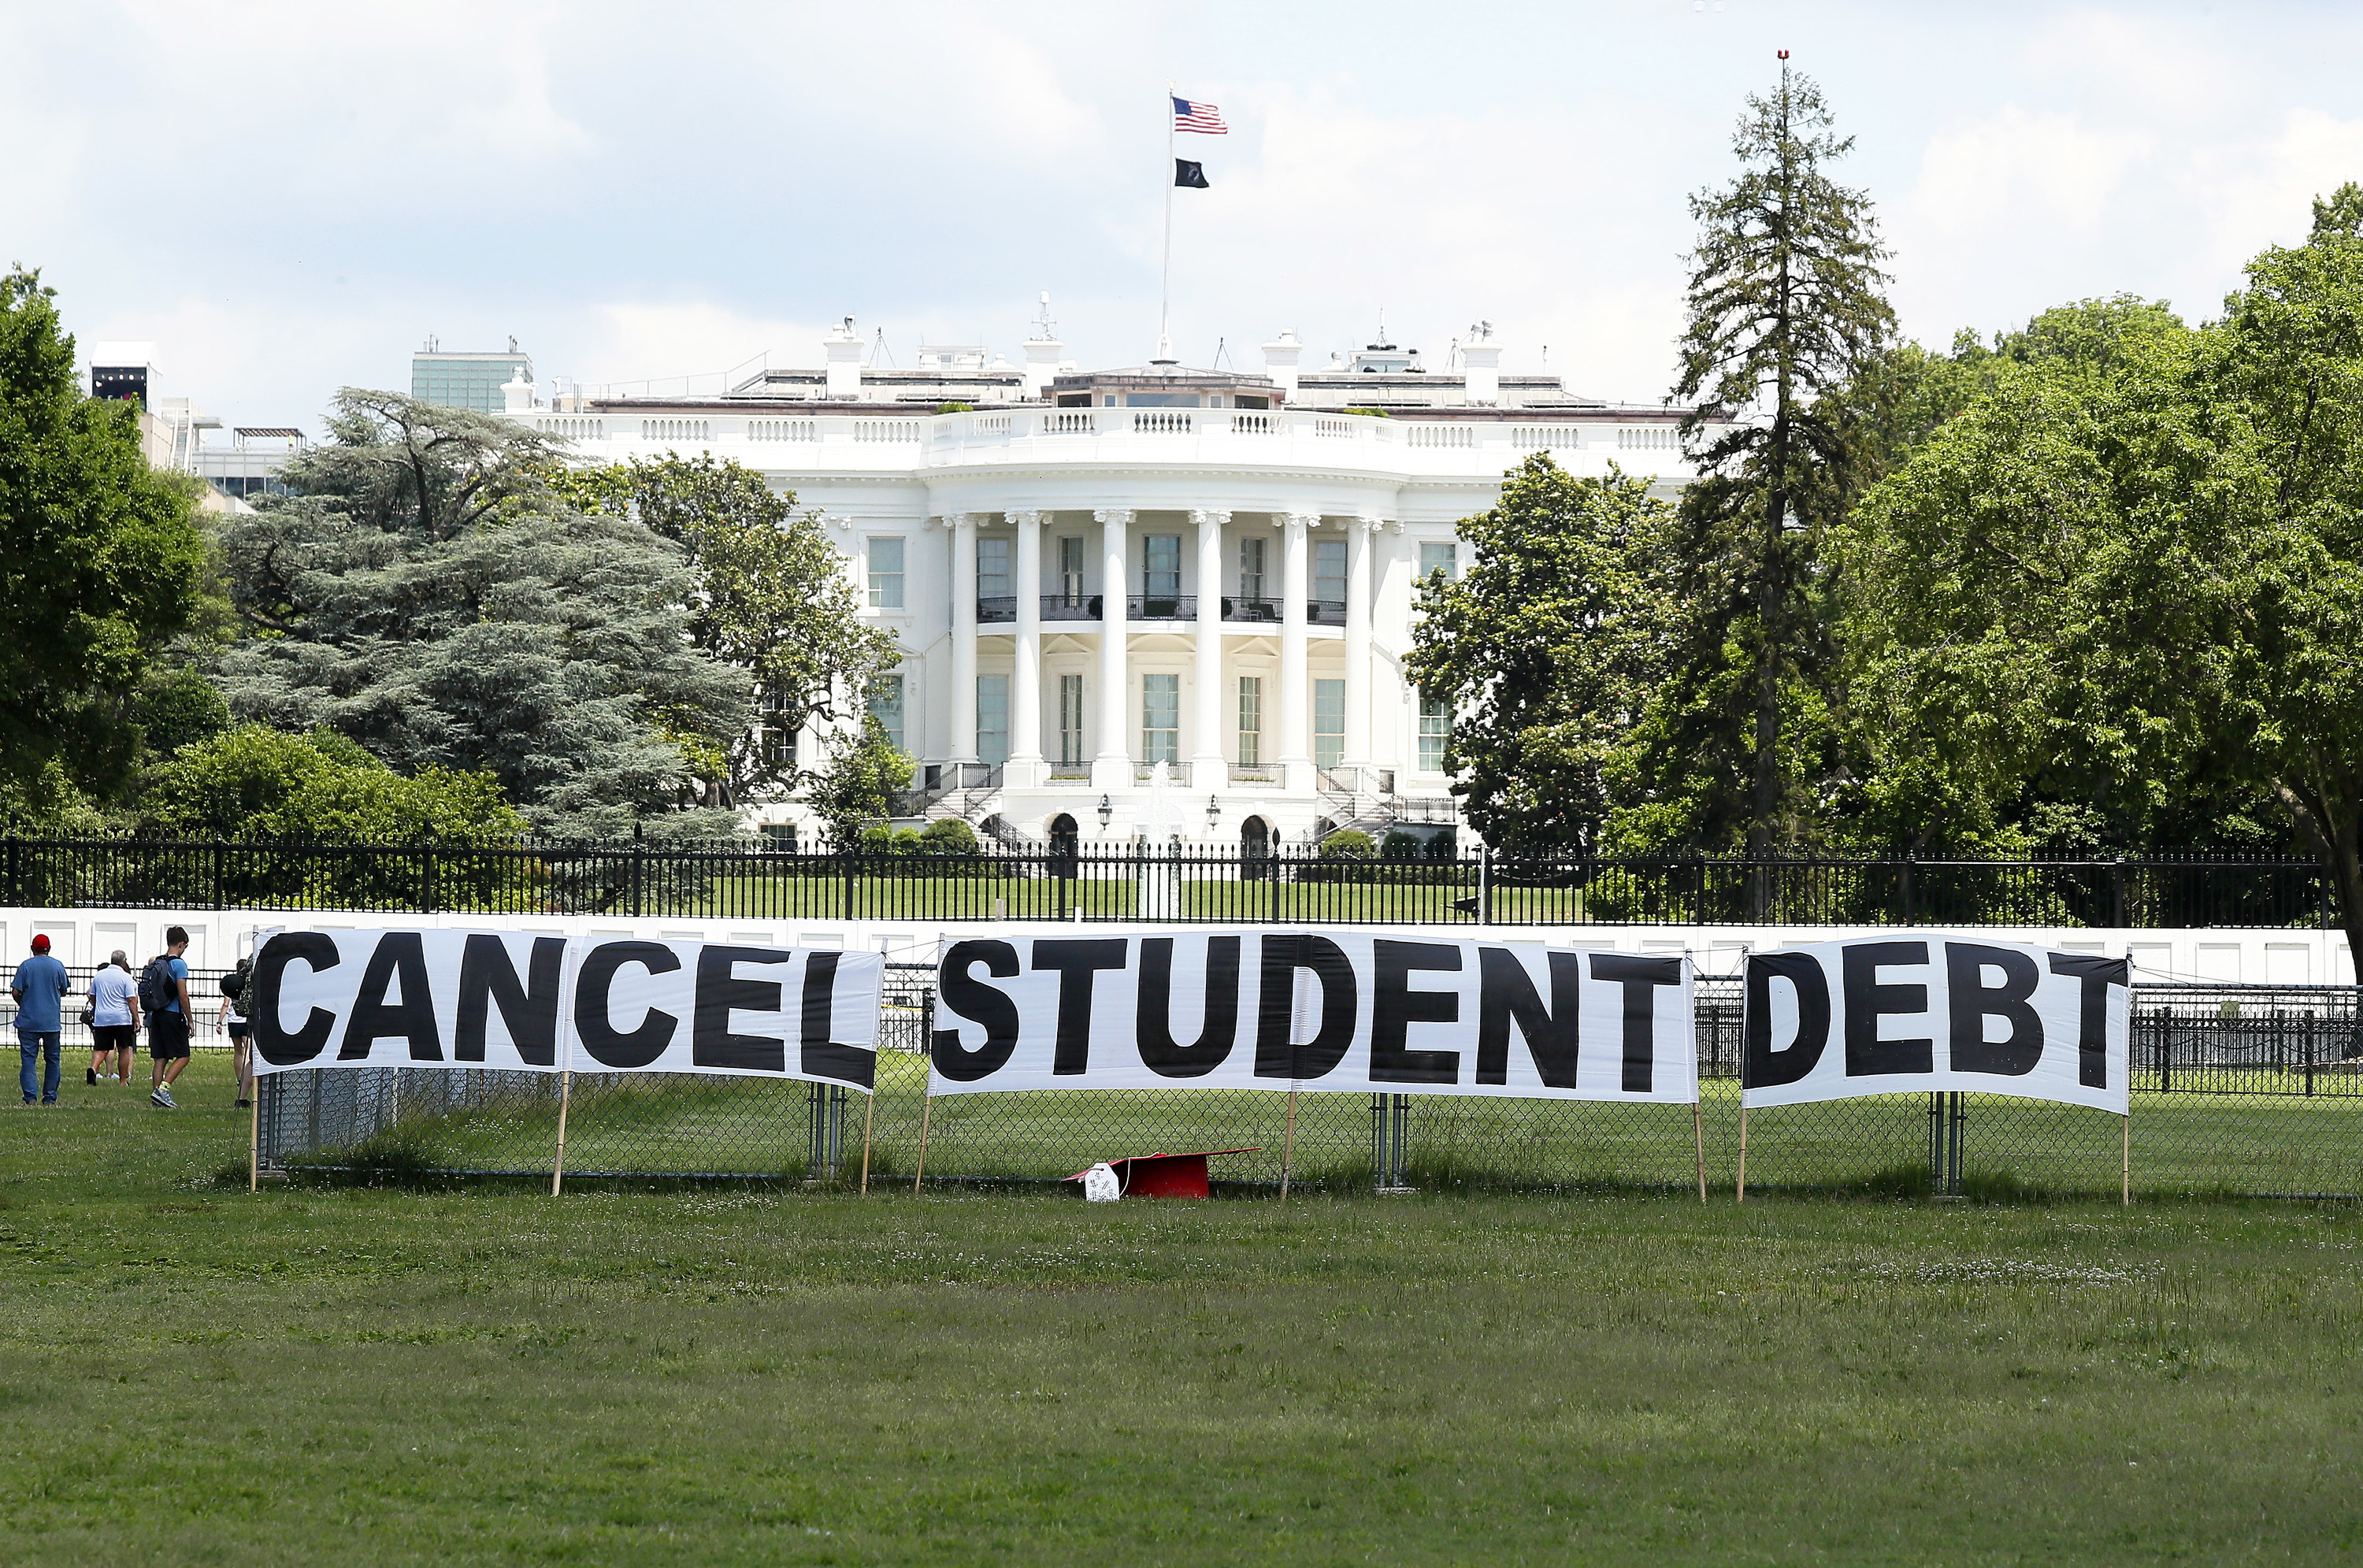 Cancel student debt protest signs outside the White House